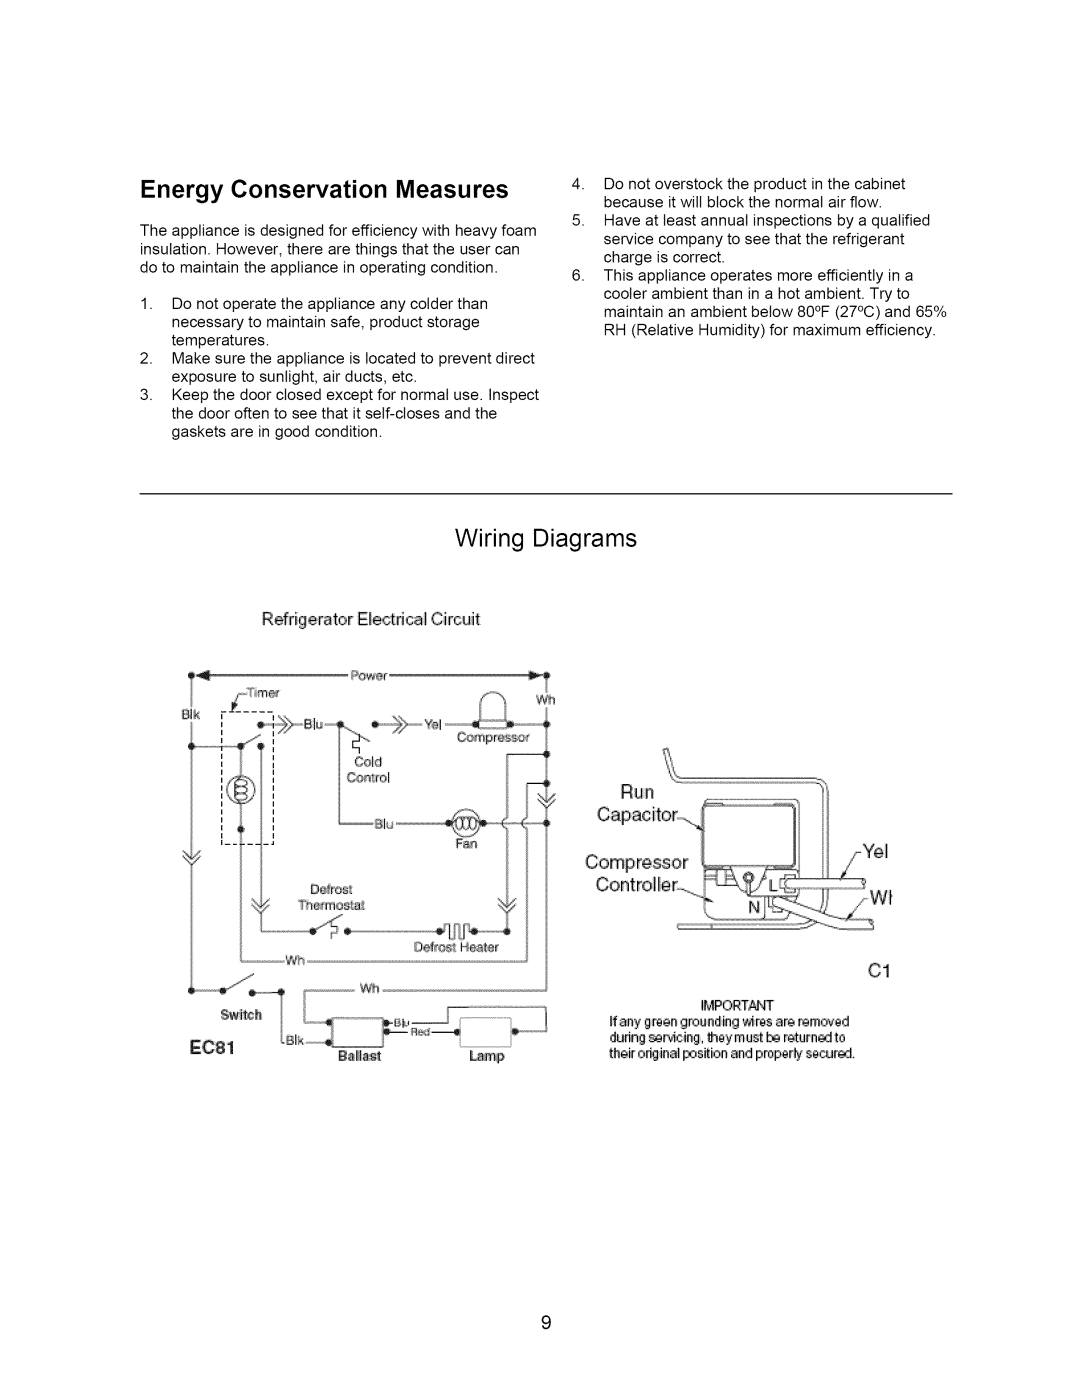 Arctic Air 297283501 important safety instructions Energy Conservation Measures, Wiring Diagrams, E¢81 